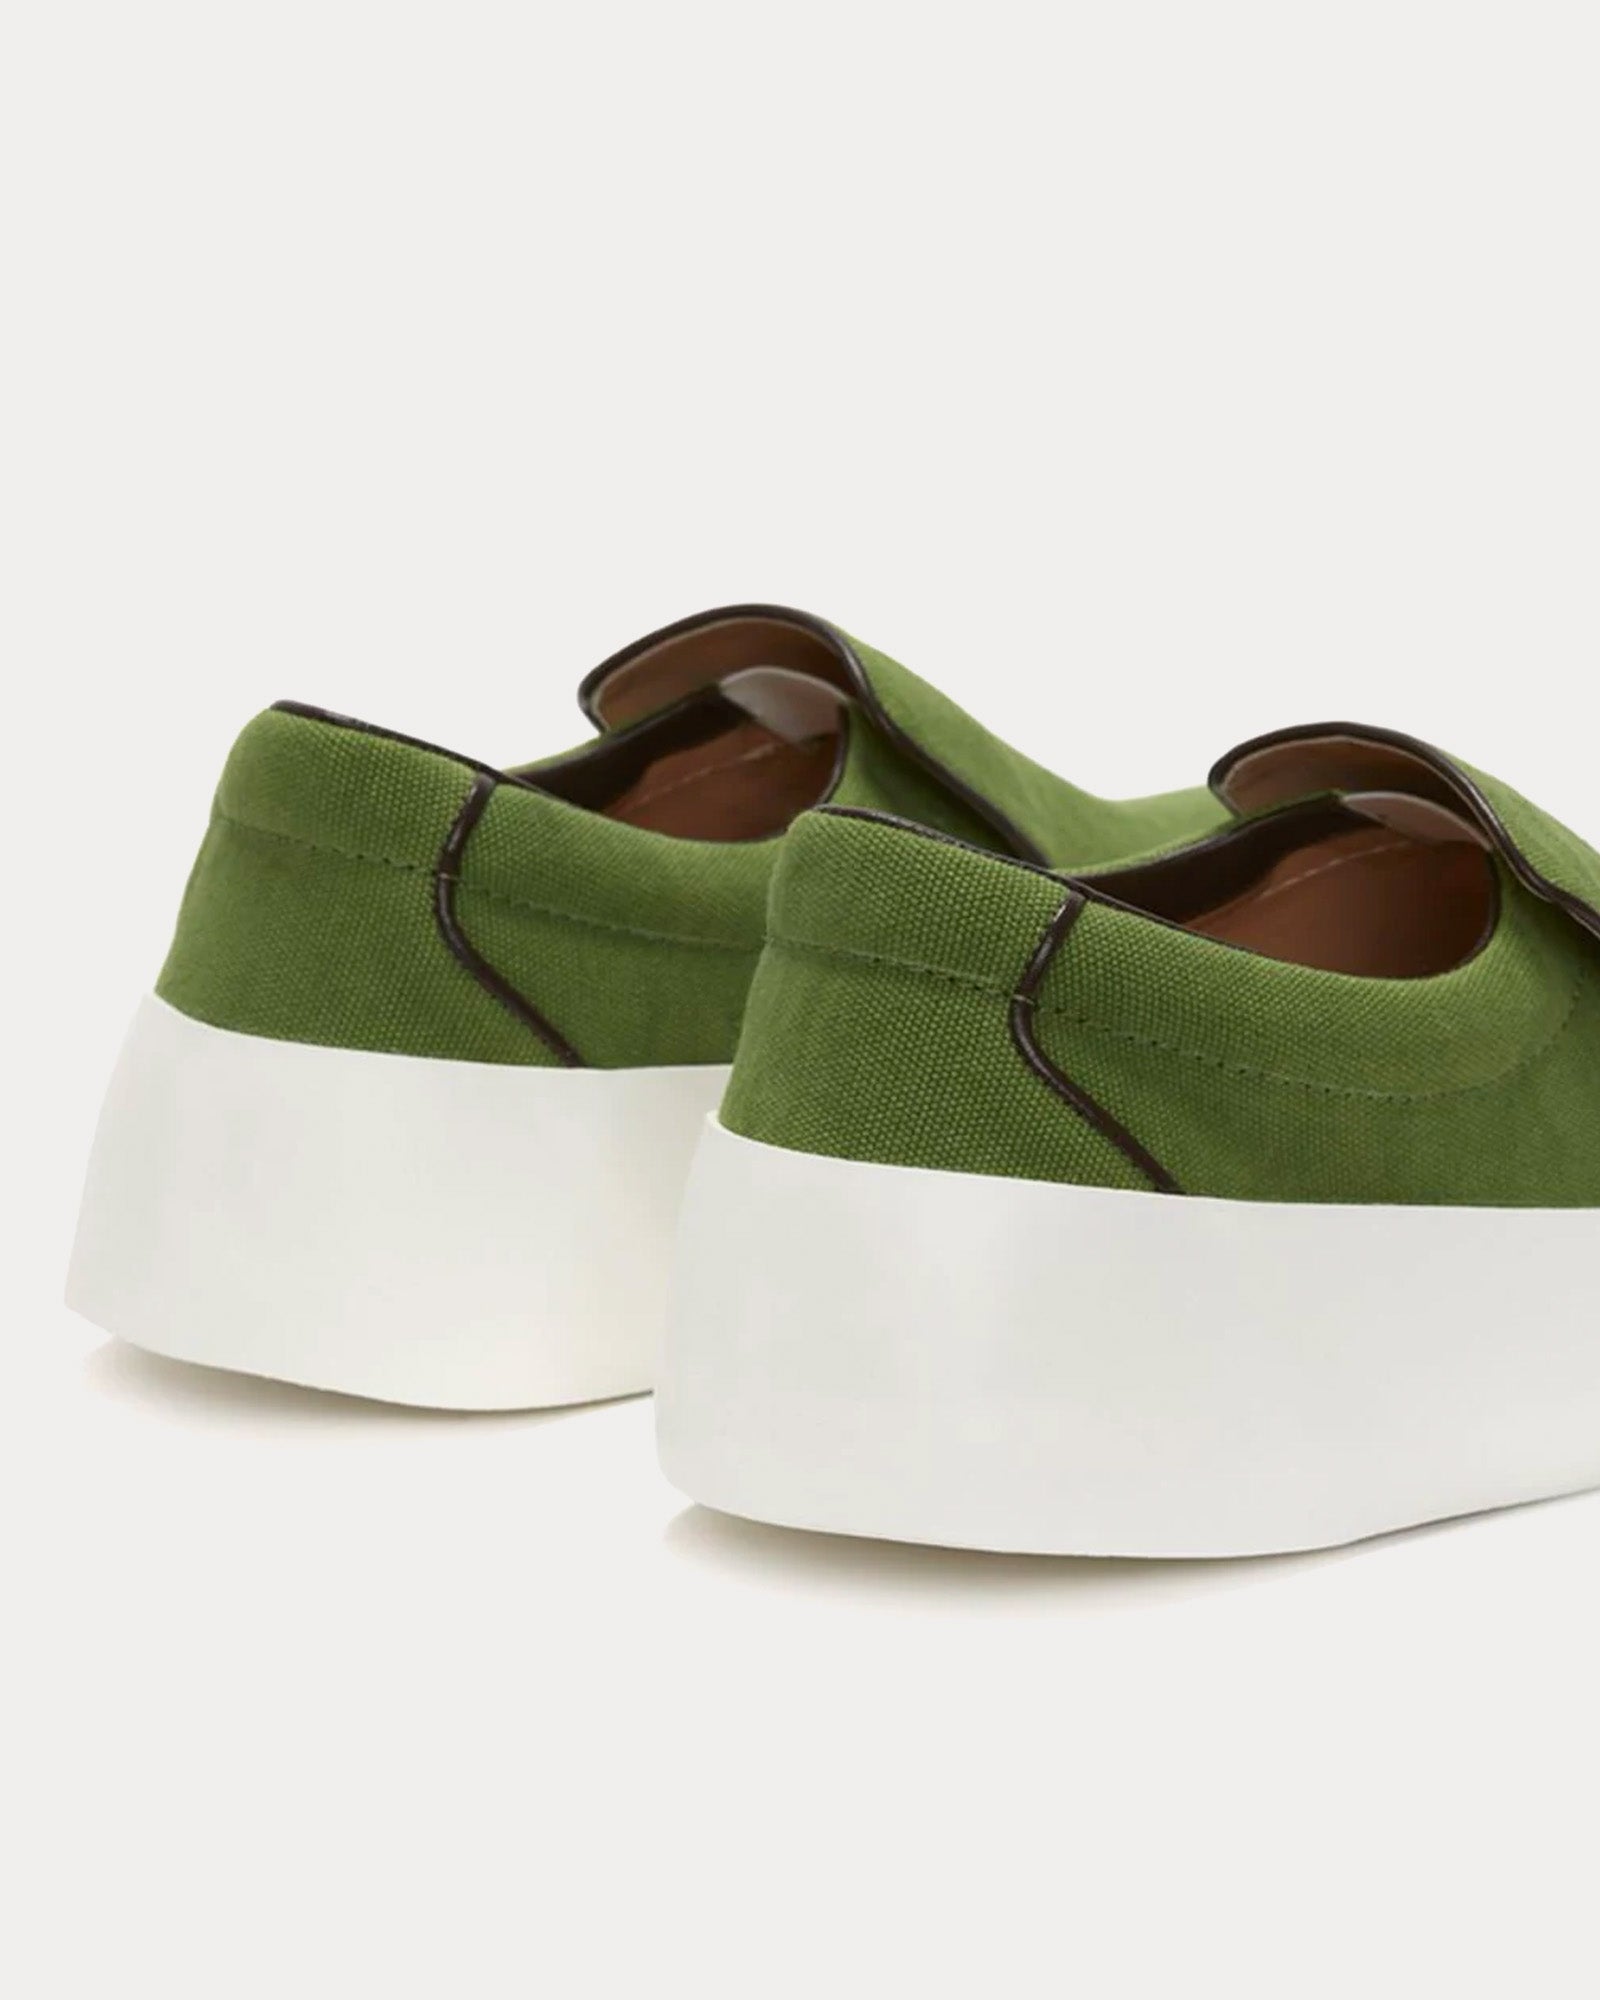 JW Anderson - Leather Green Slip On Sneakers